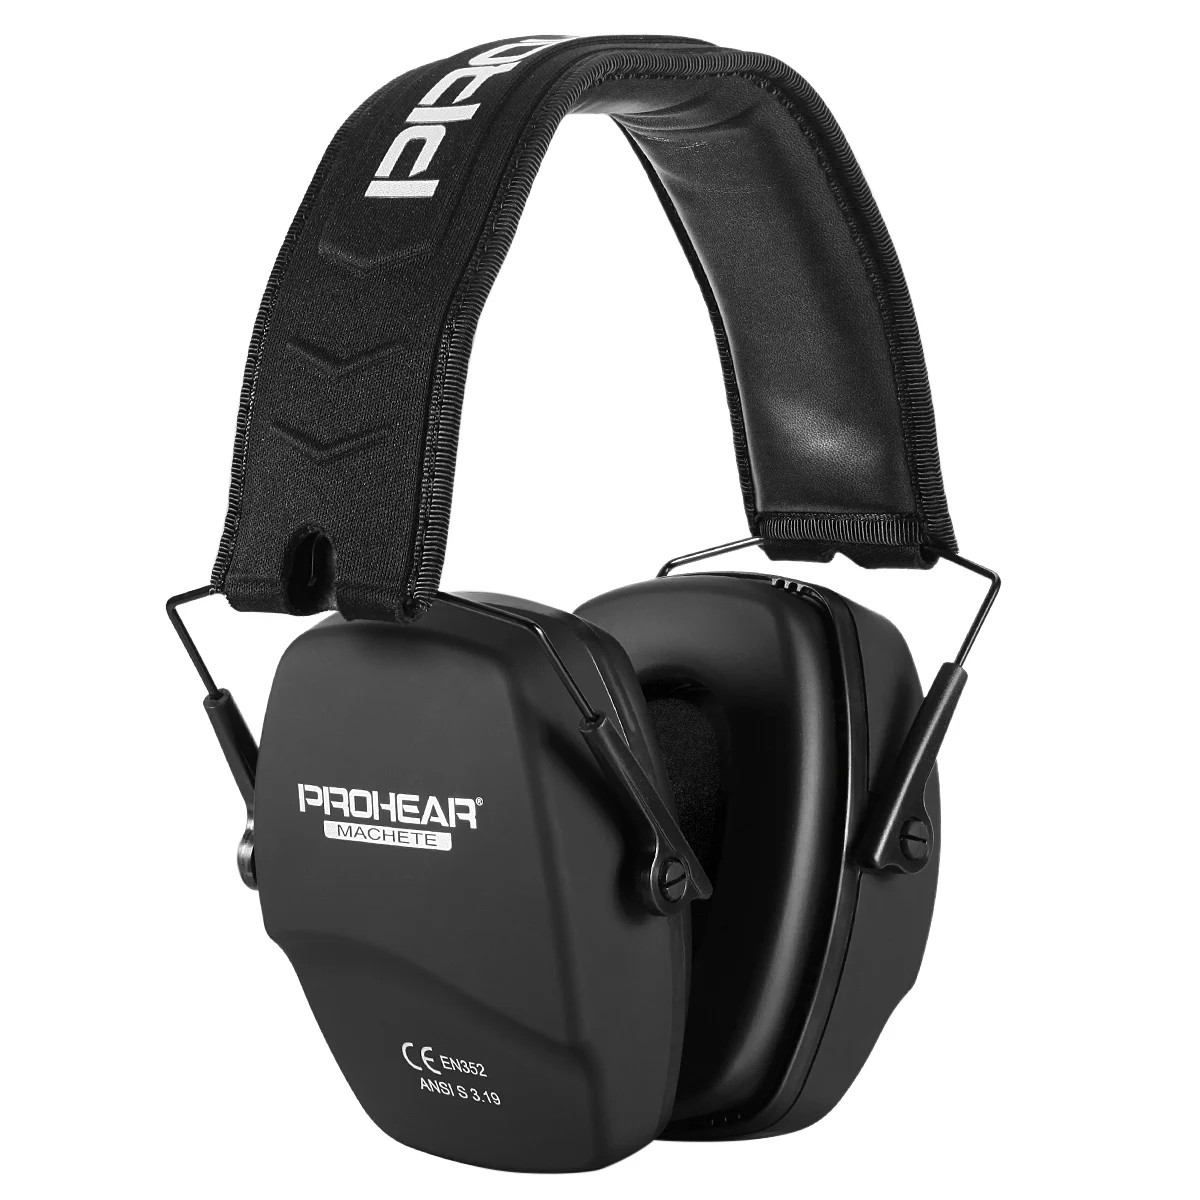 Foldable Ear Muffs Hearing Noise Reduction 25dB Shooting Range Safety Protection 